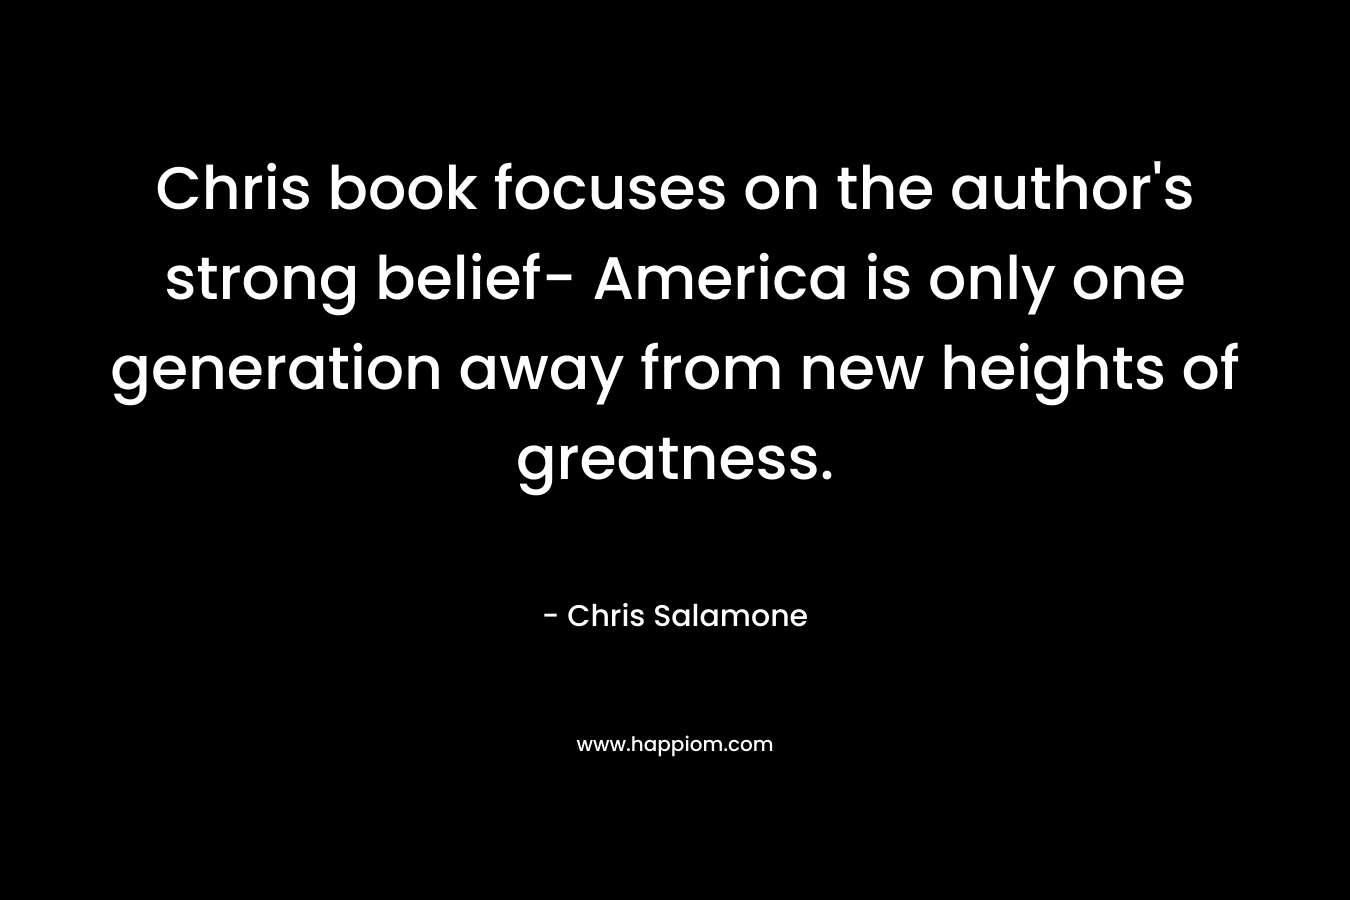 Chris book focuses on the author's strong belief- America is only one generation away from new heights of greatness.